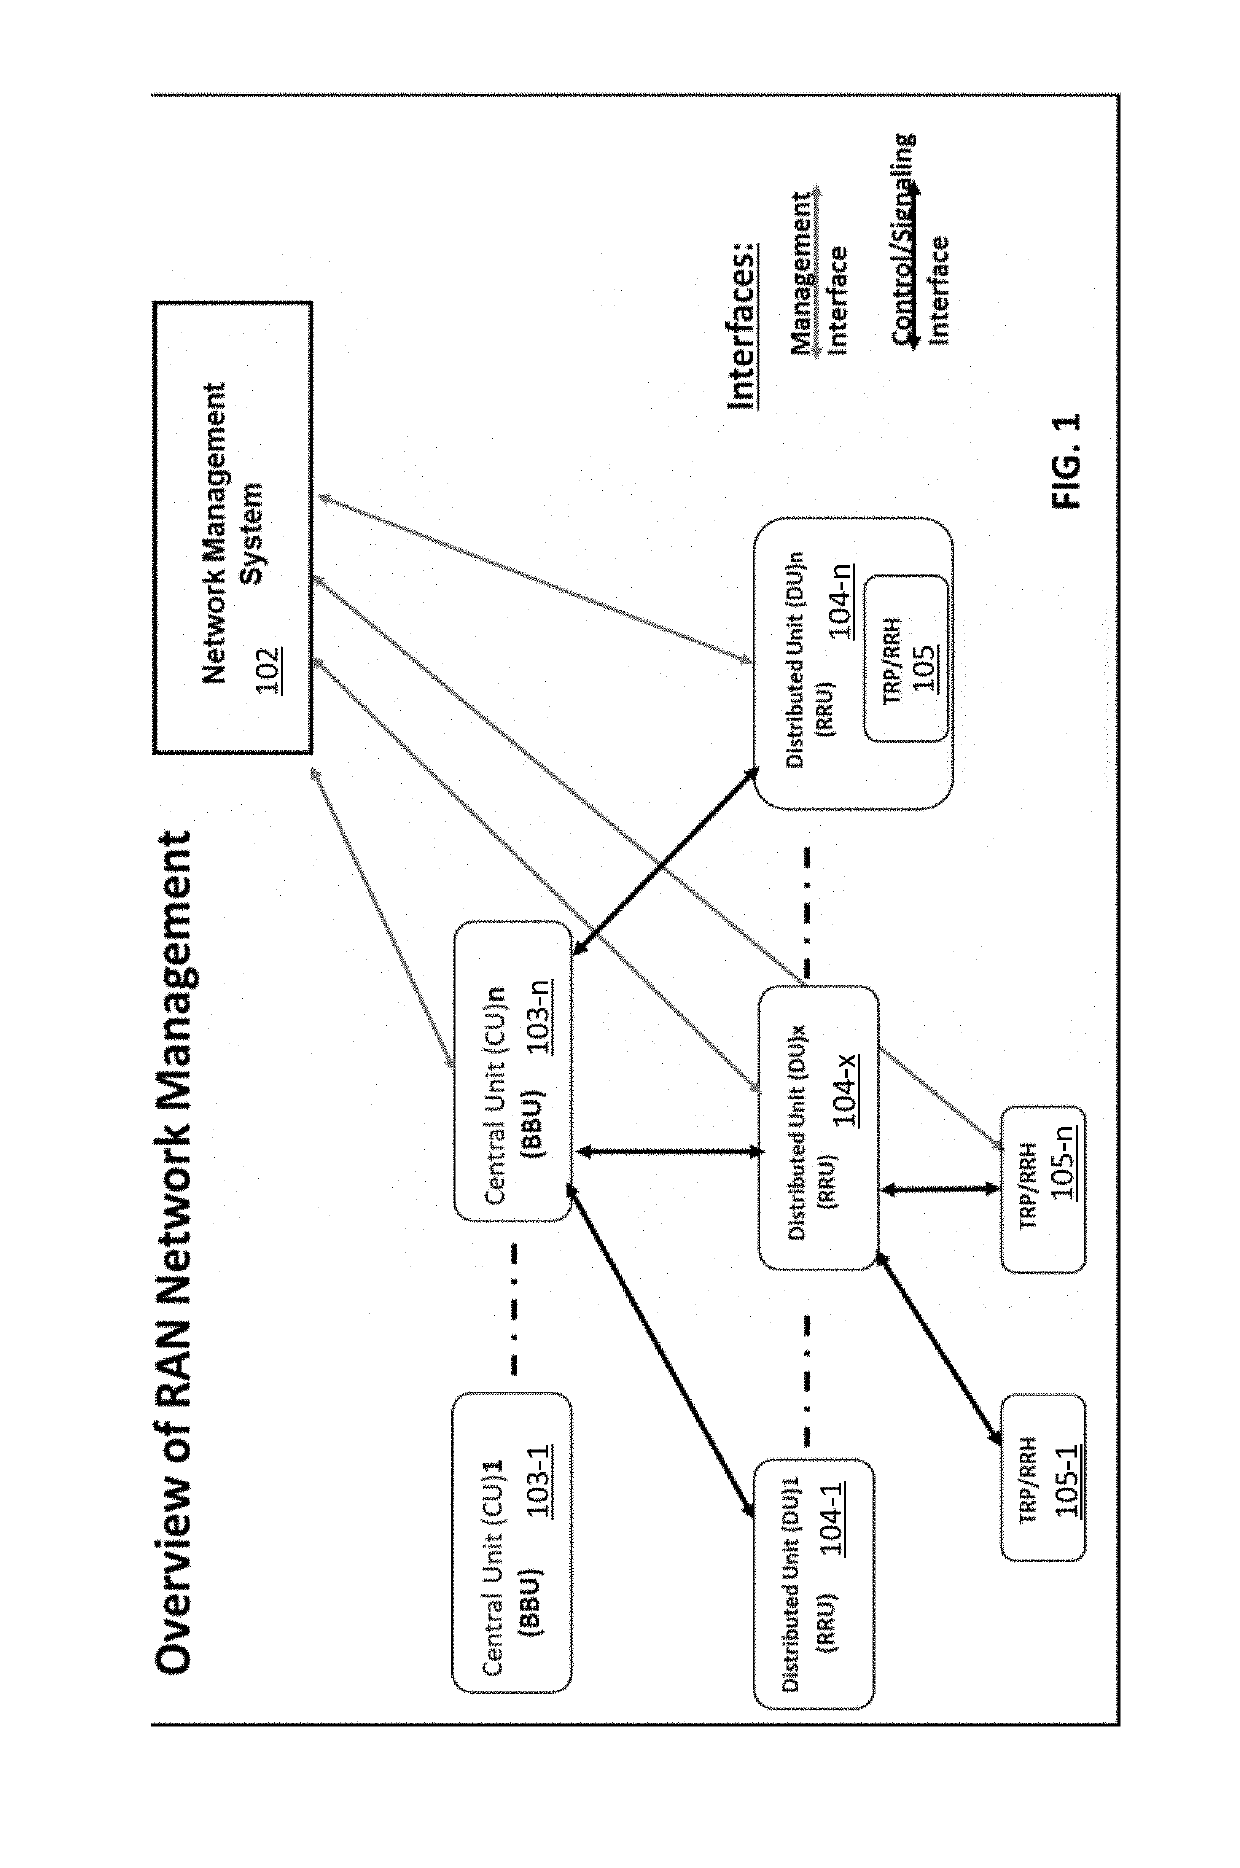 Management of radio units in cloud radio access networks